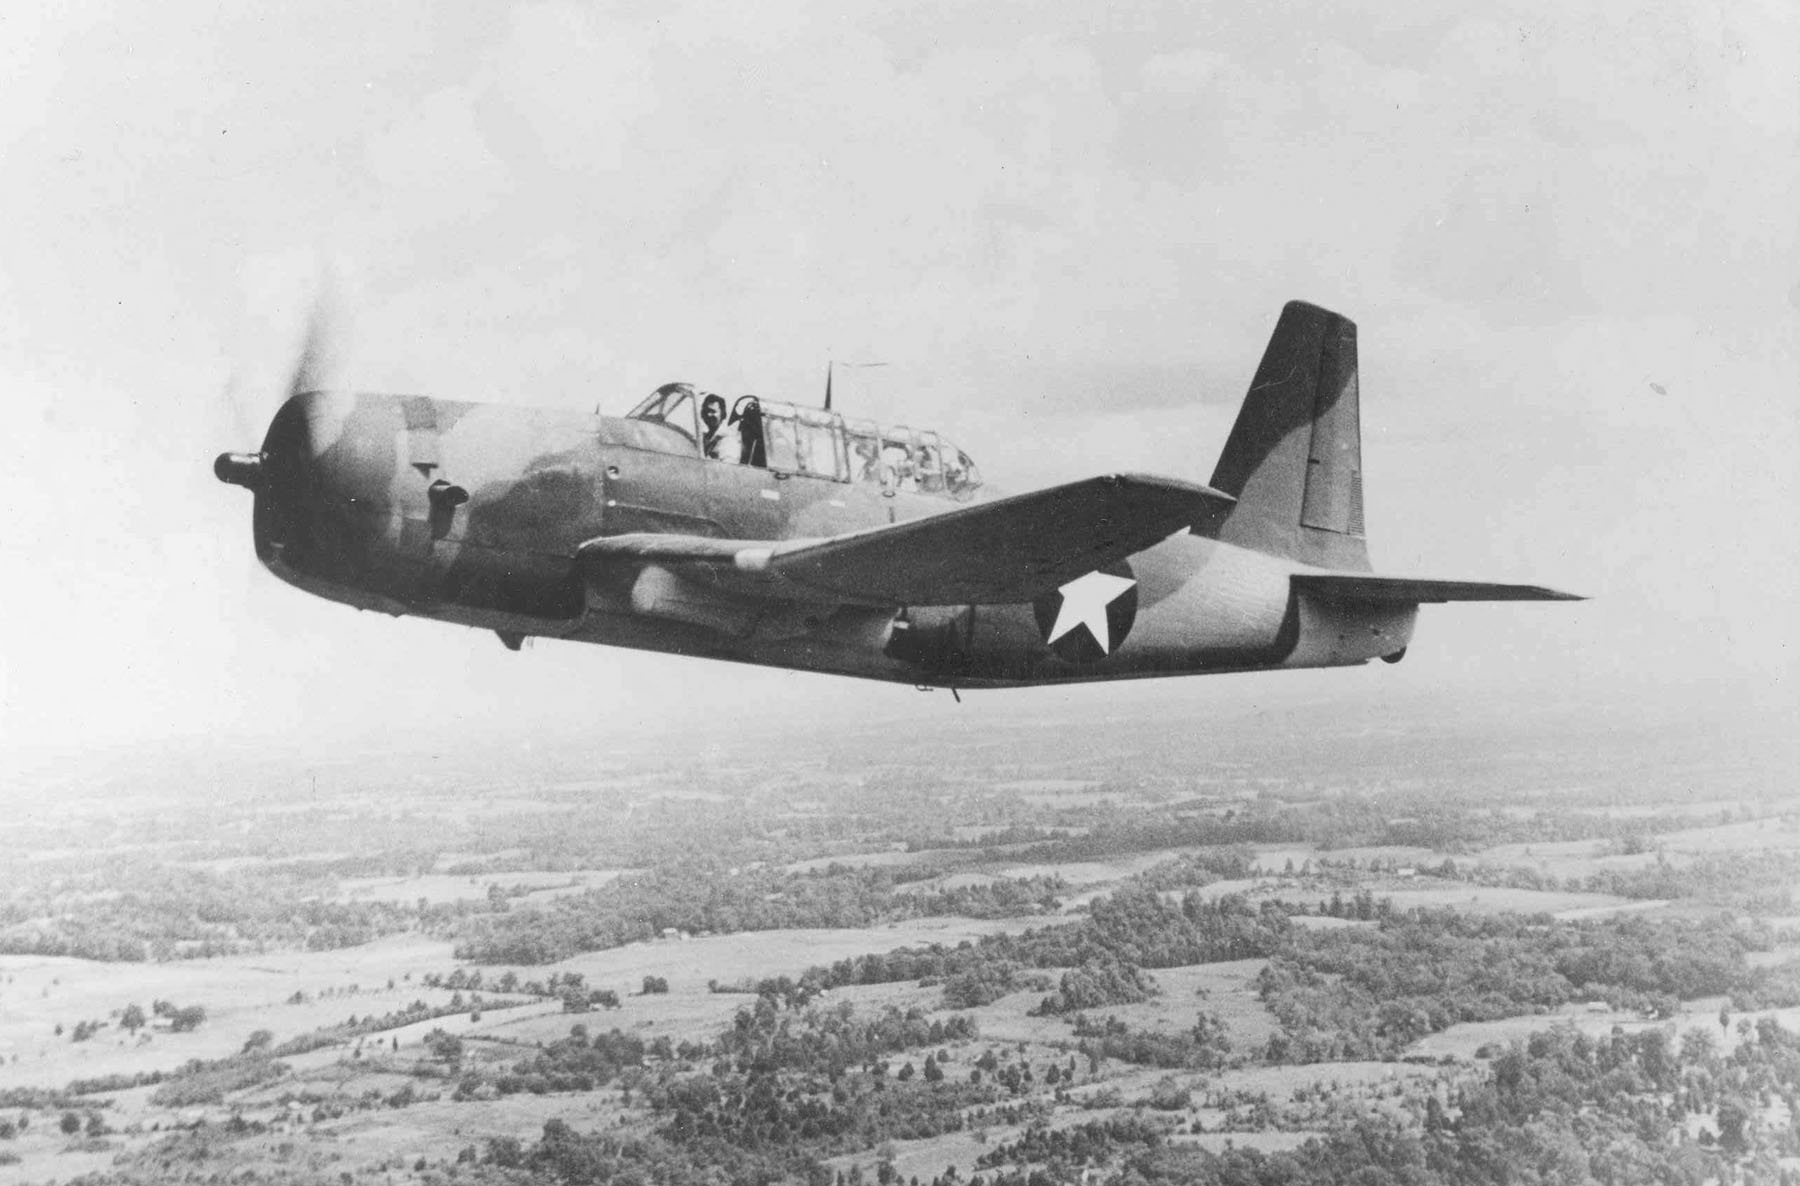 A Vultee A-35 Vengeance dive bomber in flight, Feb-Jun 1943.  This aircraft has undergone the target tug conversion that removed all armament